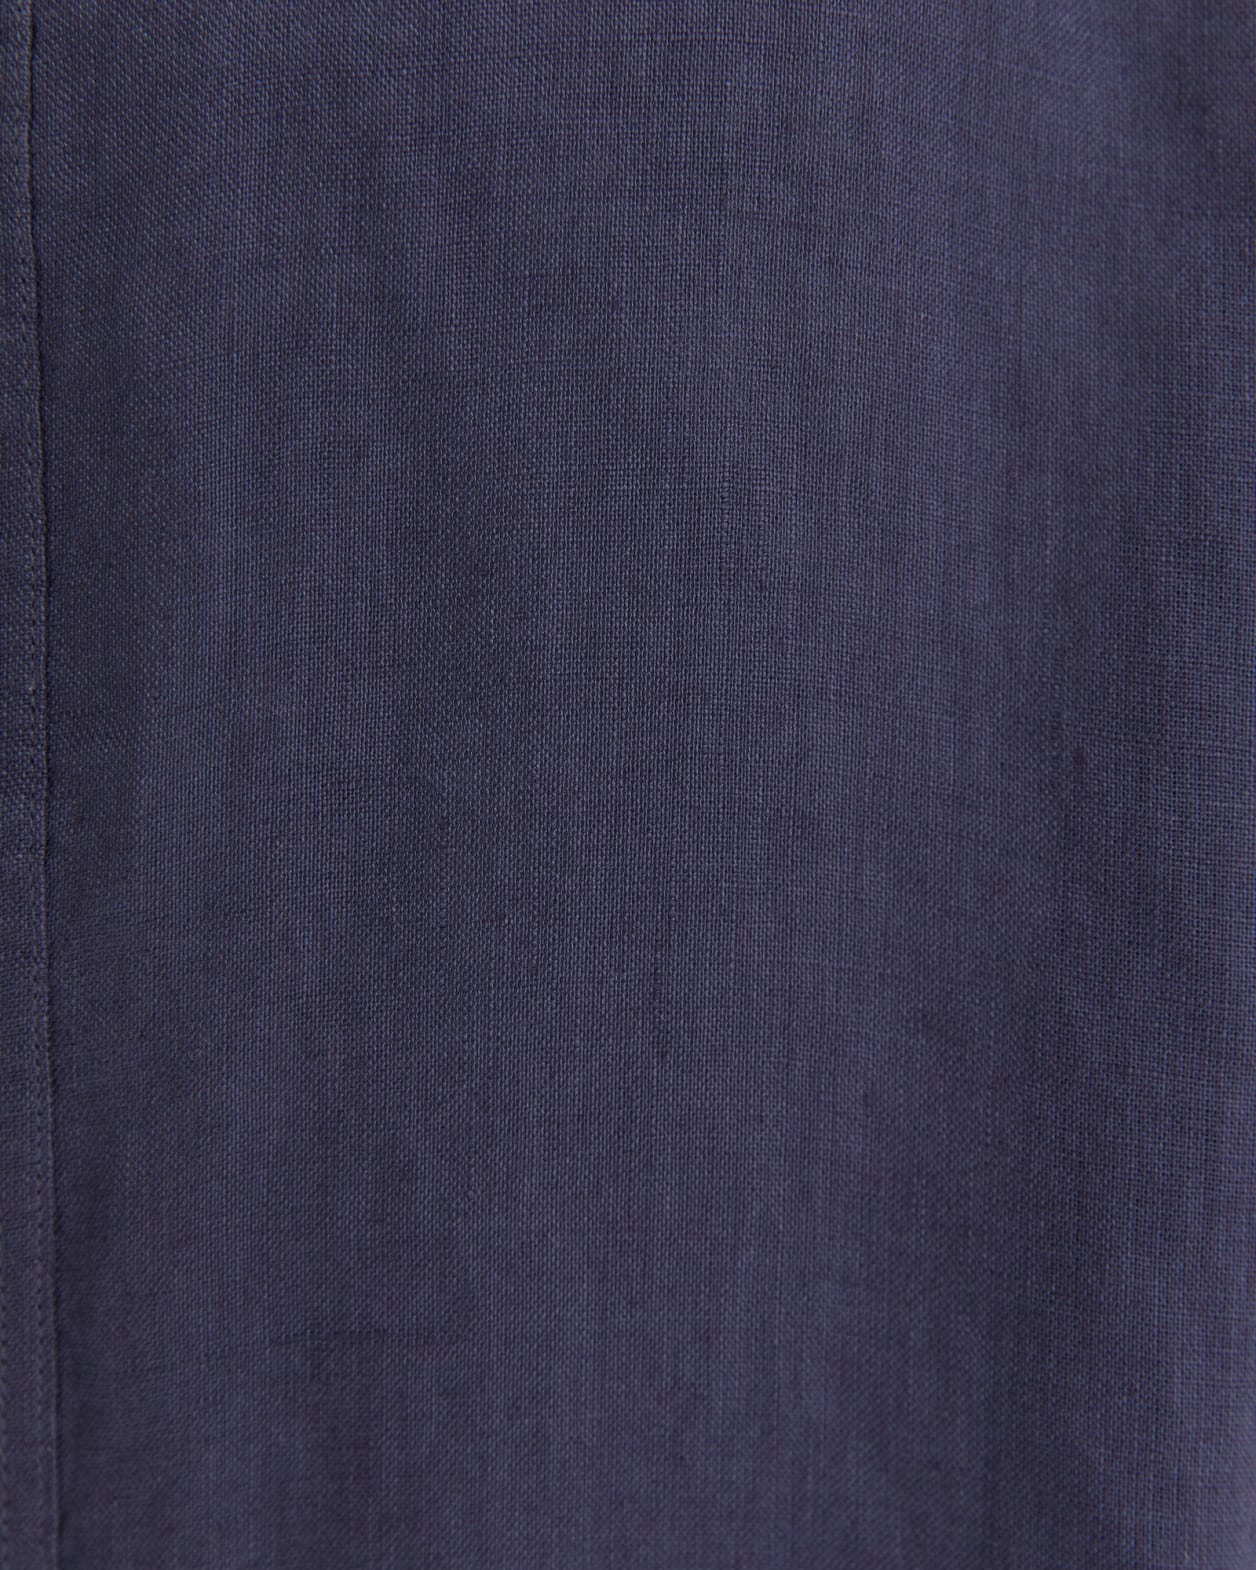 Hux Linen Shirt in WASHED INK